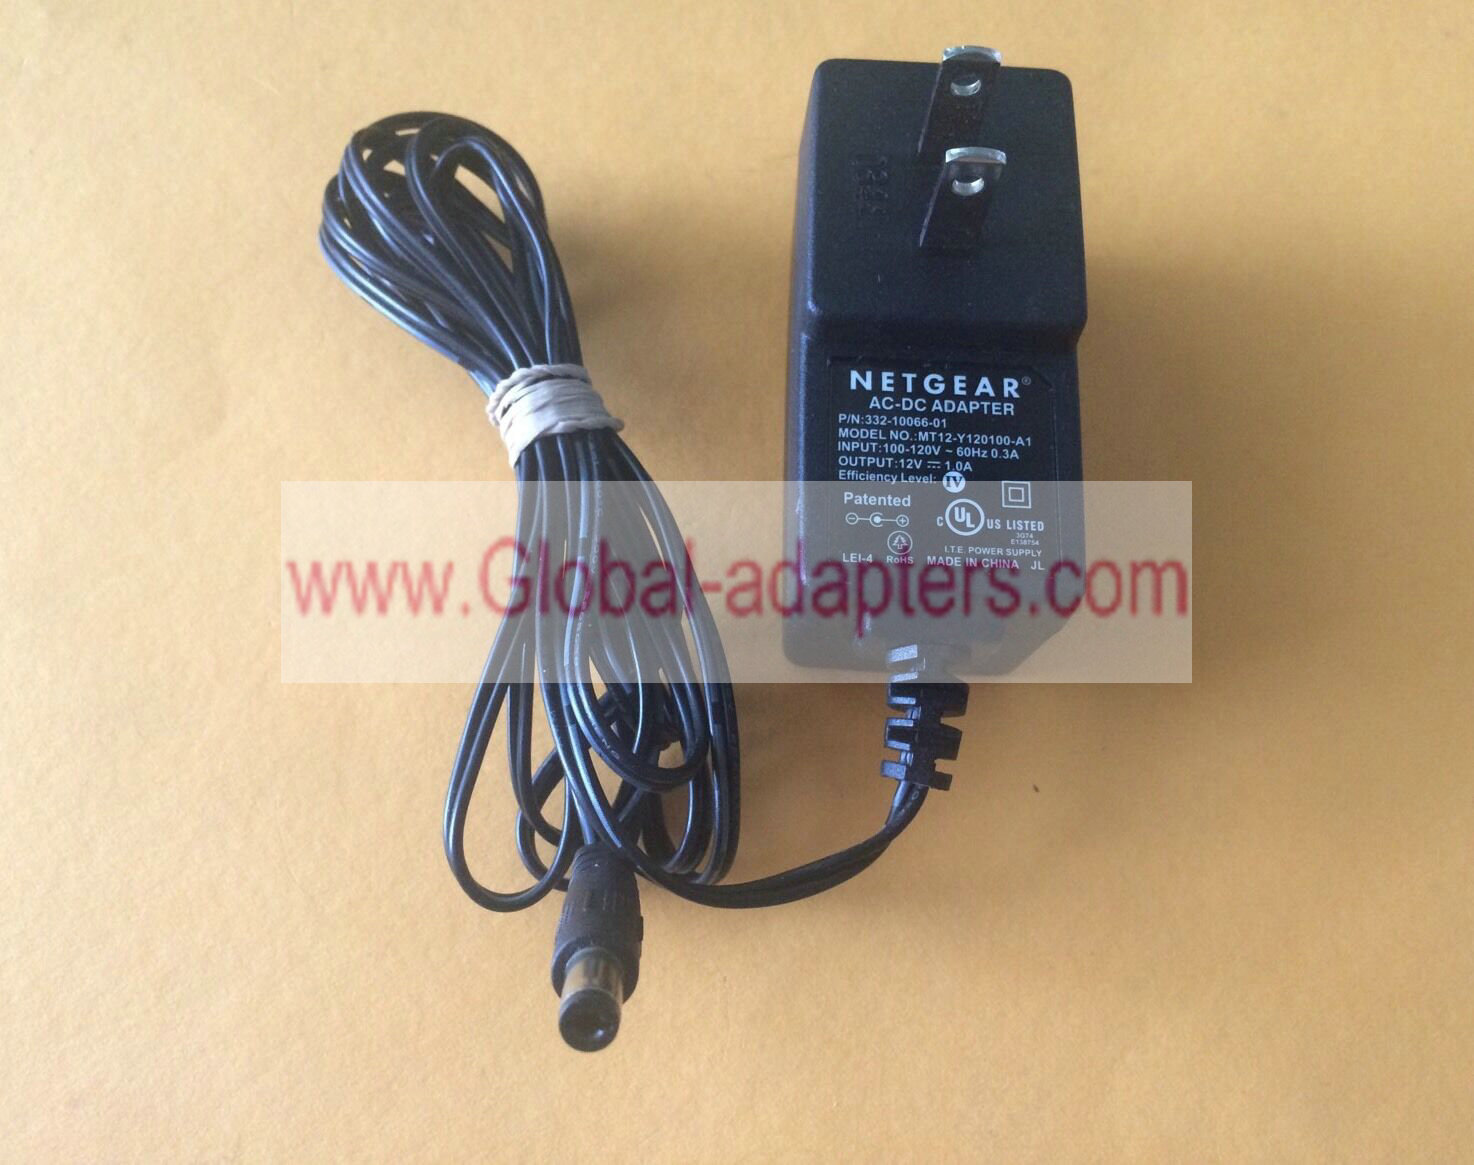 New Netgear MT12-Y120100-A1 AC-DC Adapter for 332-10066-01 332-10041-01 Power Supply - Click Image to Close